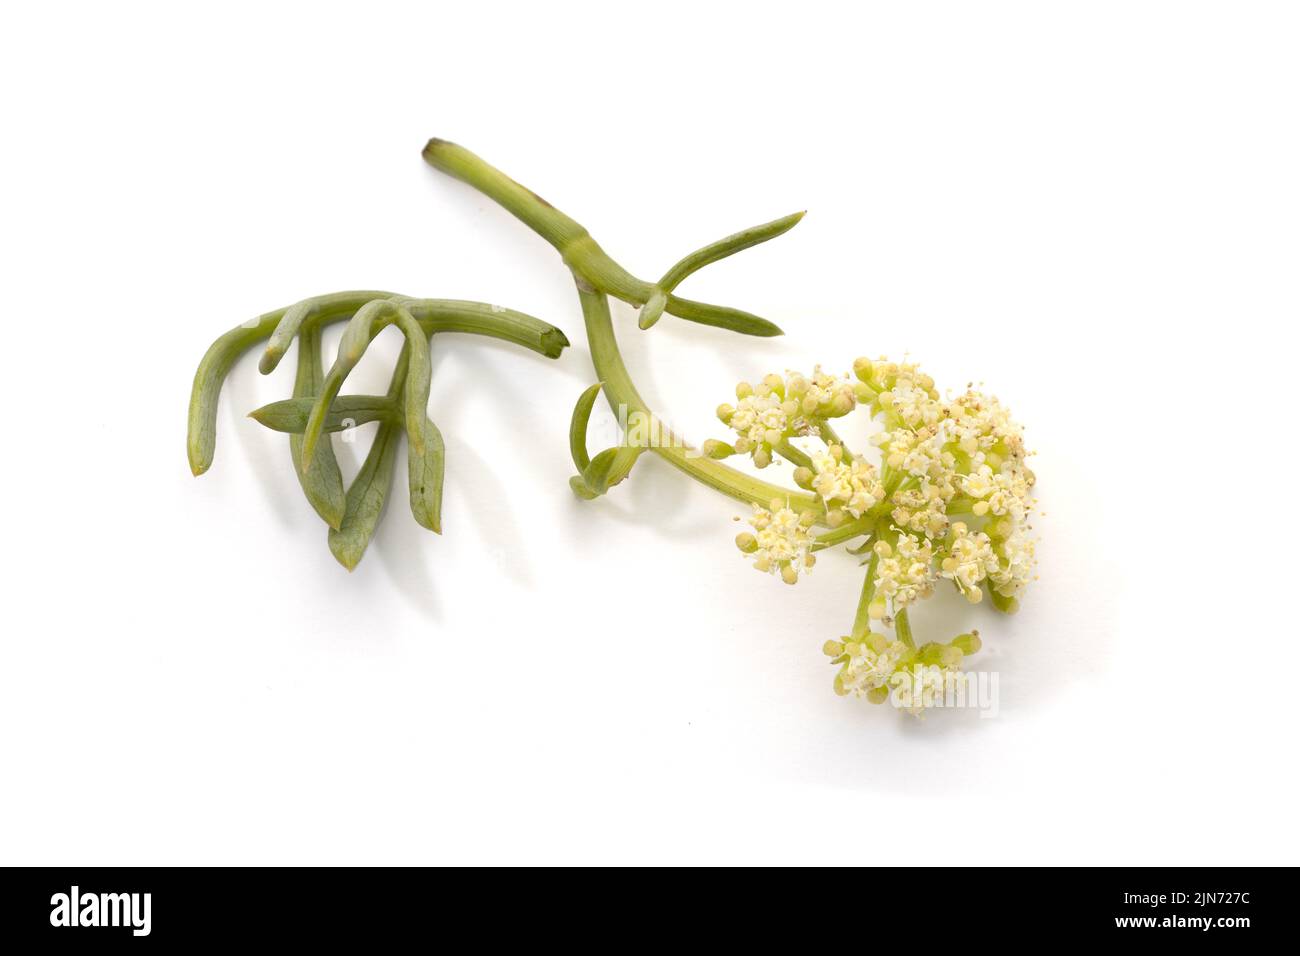 Crithmum maritimum isolated on white background. Fresh Sea fennel or Rock Samphire twig with flowers and leaves Stock Photo